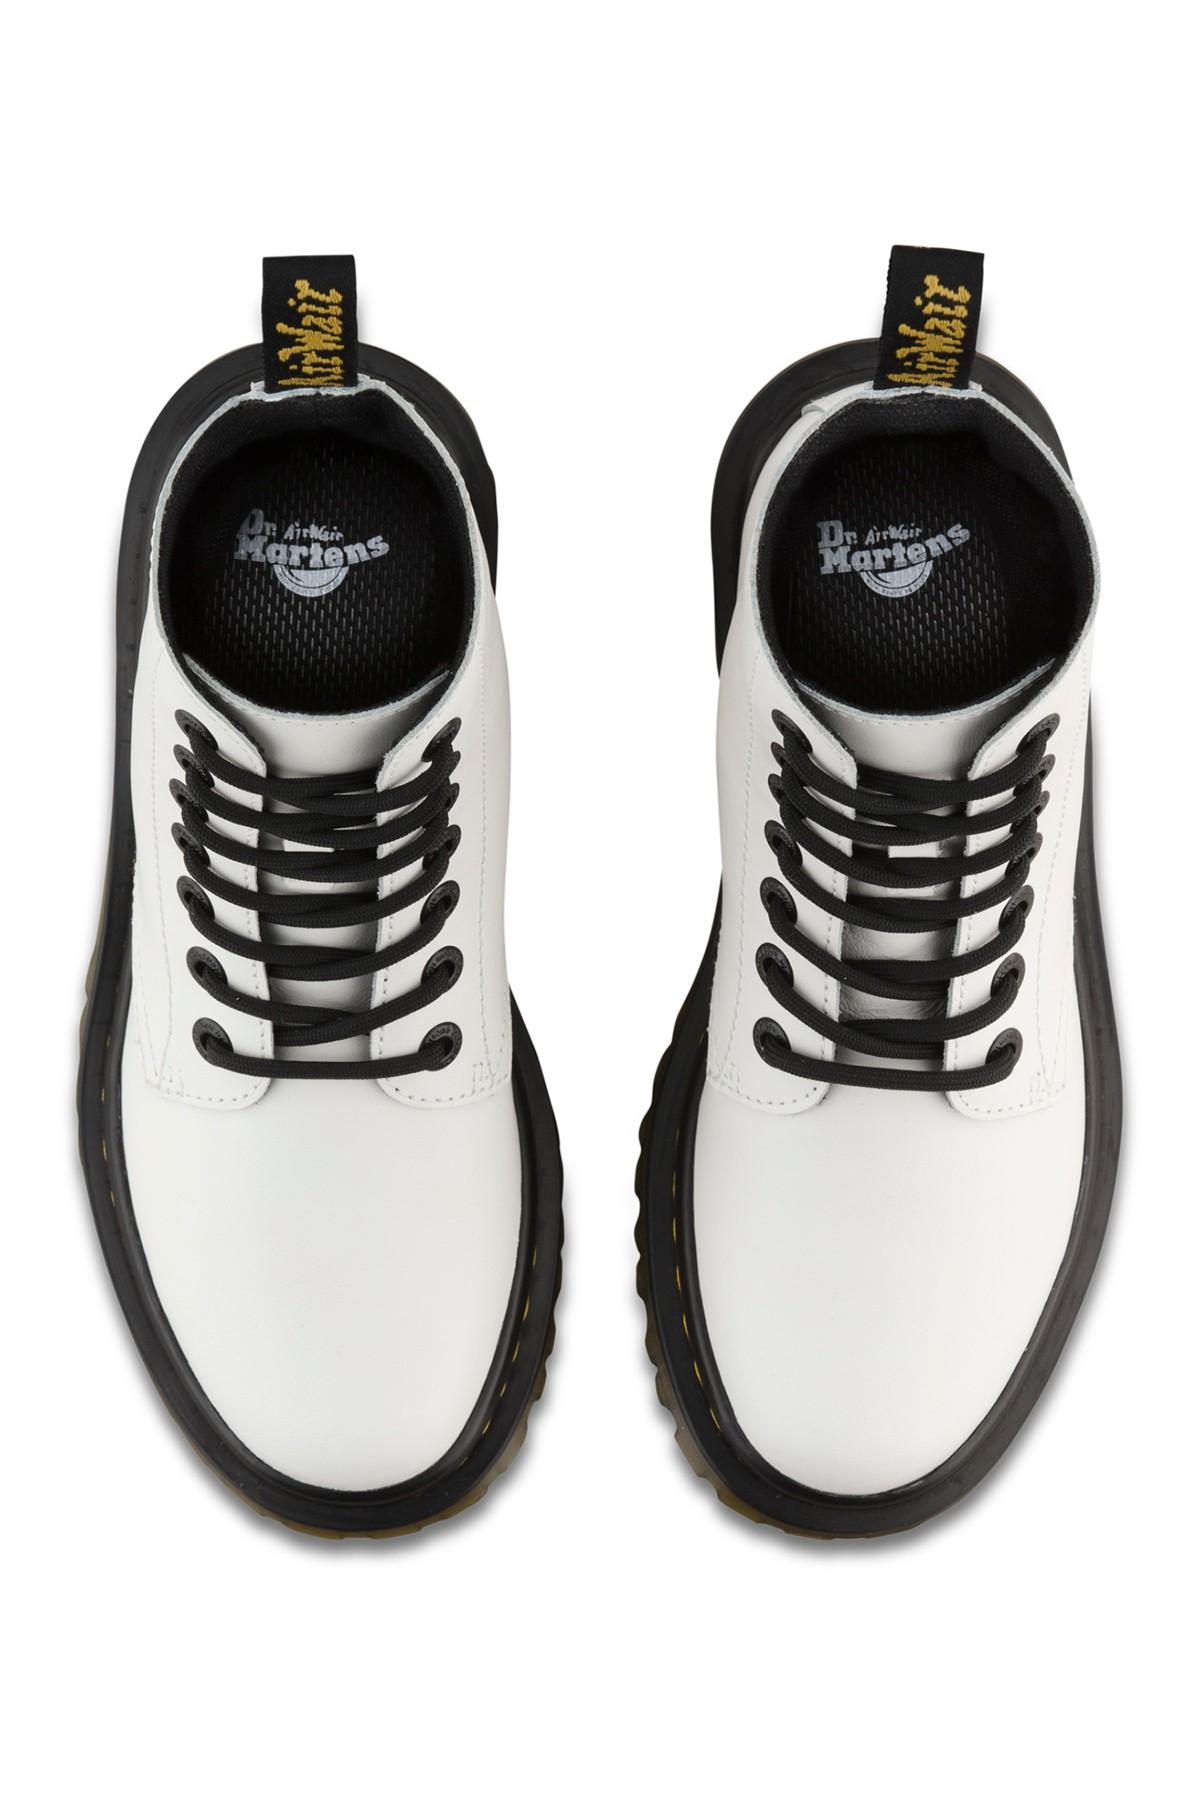 Dr. Martens Luana Leather Combat Boot in White | Lyst